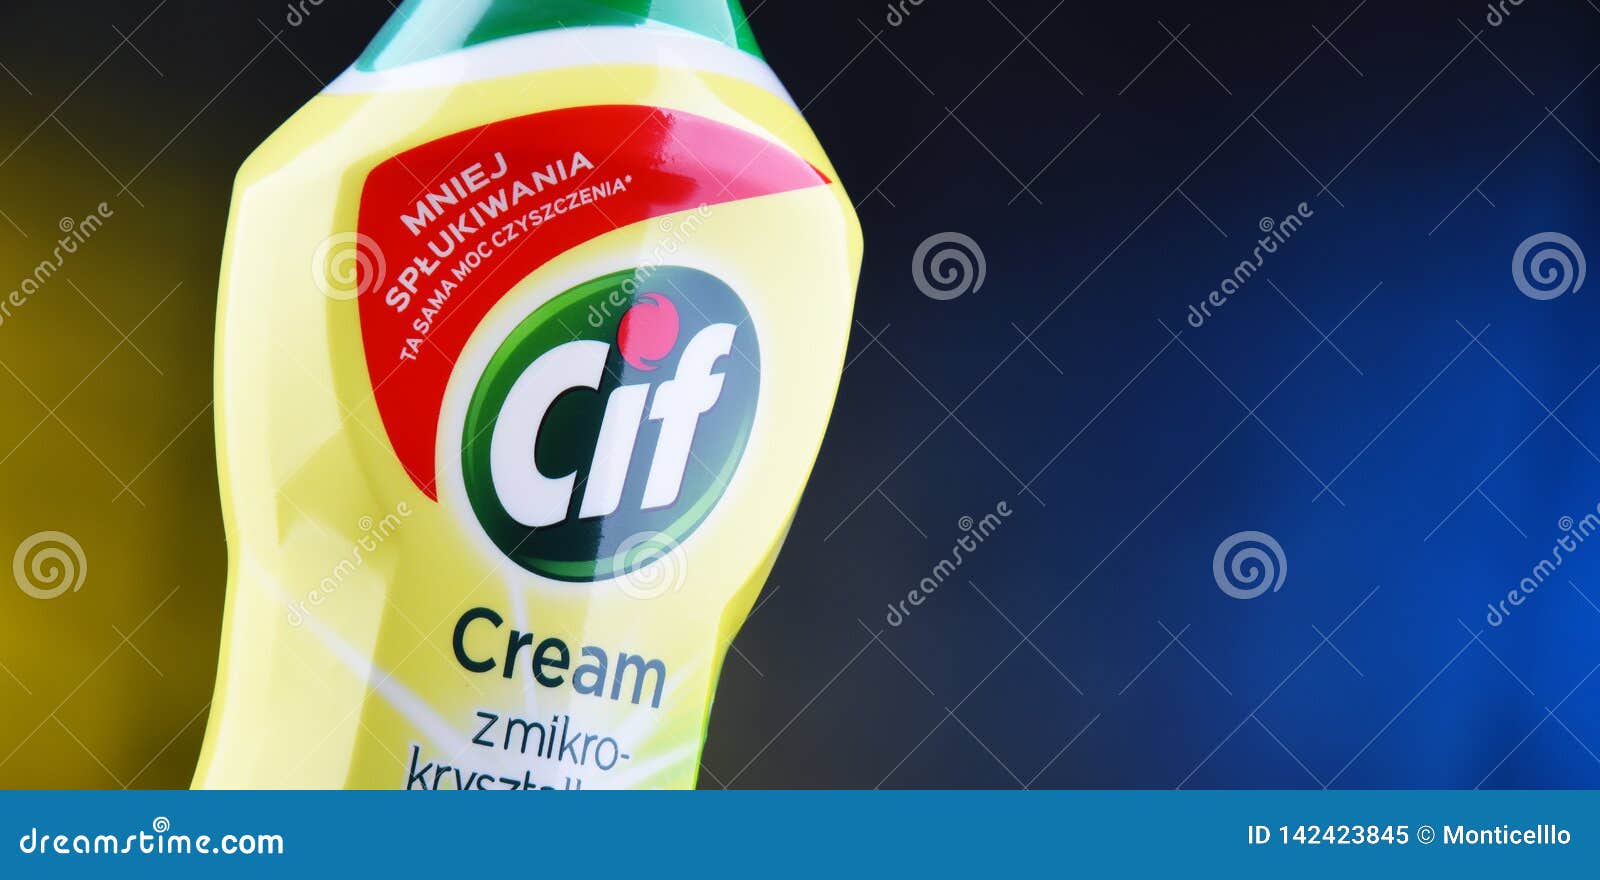 Container of Cif Products by Unilever Editorial Image - Image of ...